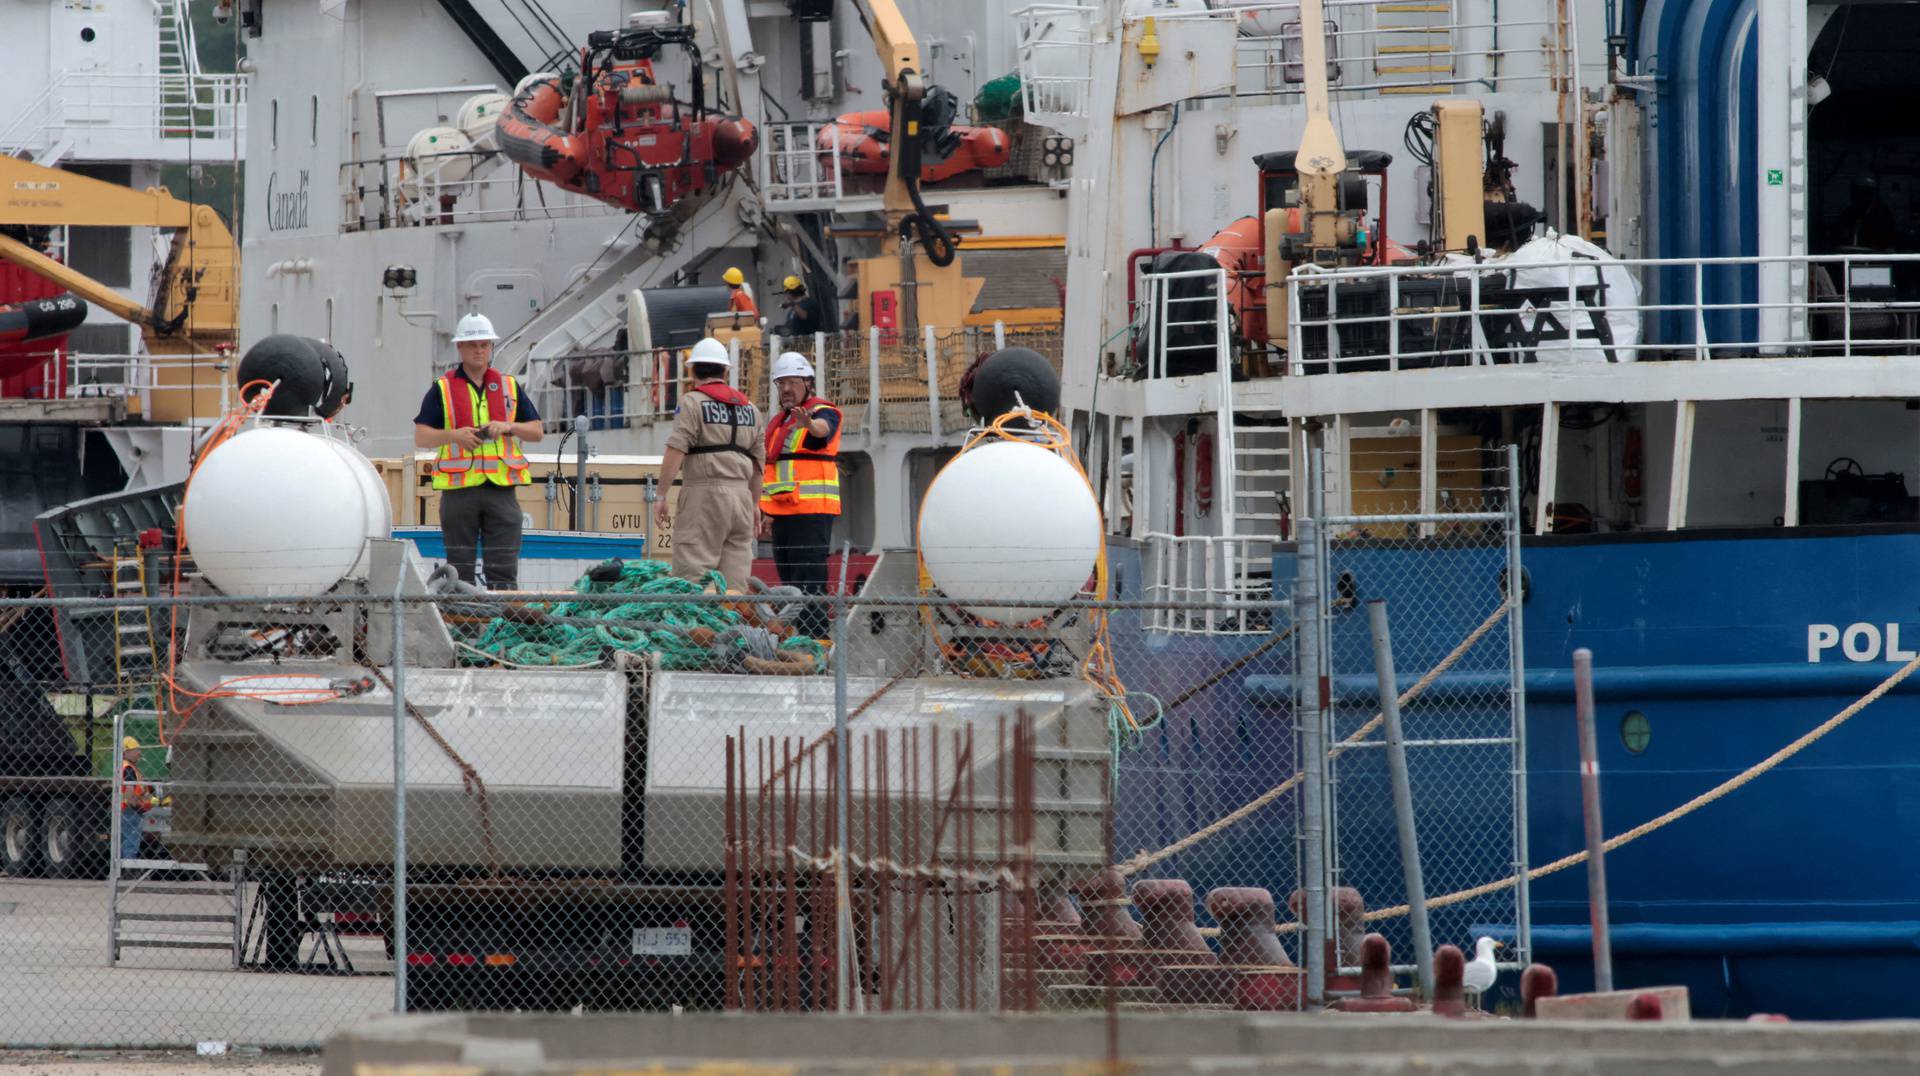 The TSB of Canada begins investigation into the loss of the Titan submersible from OceanGate Expeditions